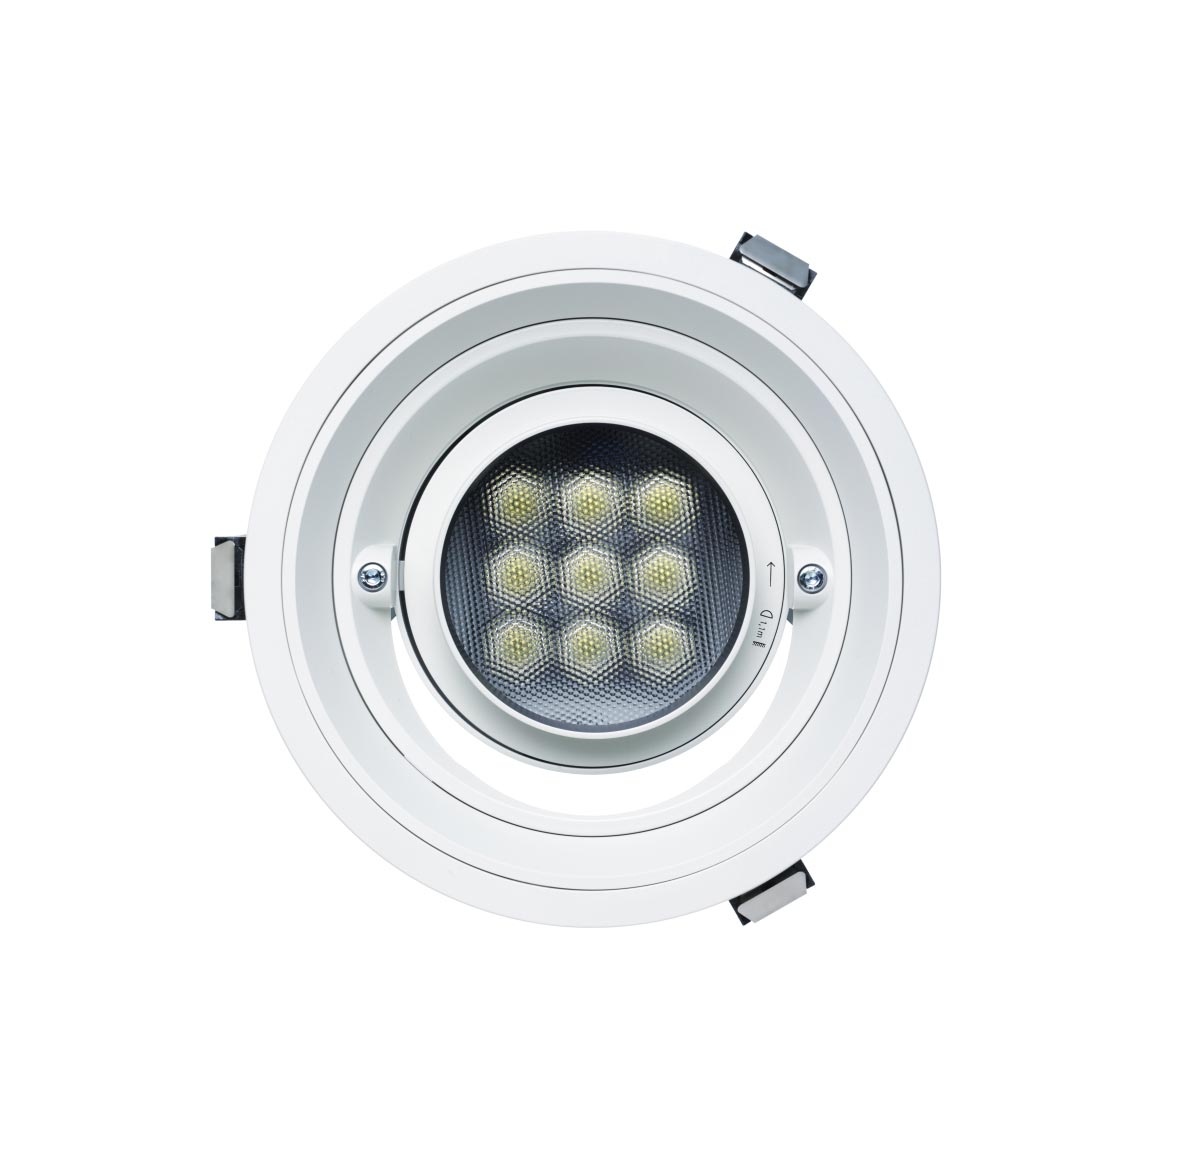 Quintessence Round Recessed Adjustable Floodlight With Regressed Mounting Tray Oval Flood Beam 18W LED 3000K DALI White Trim F/P